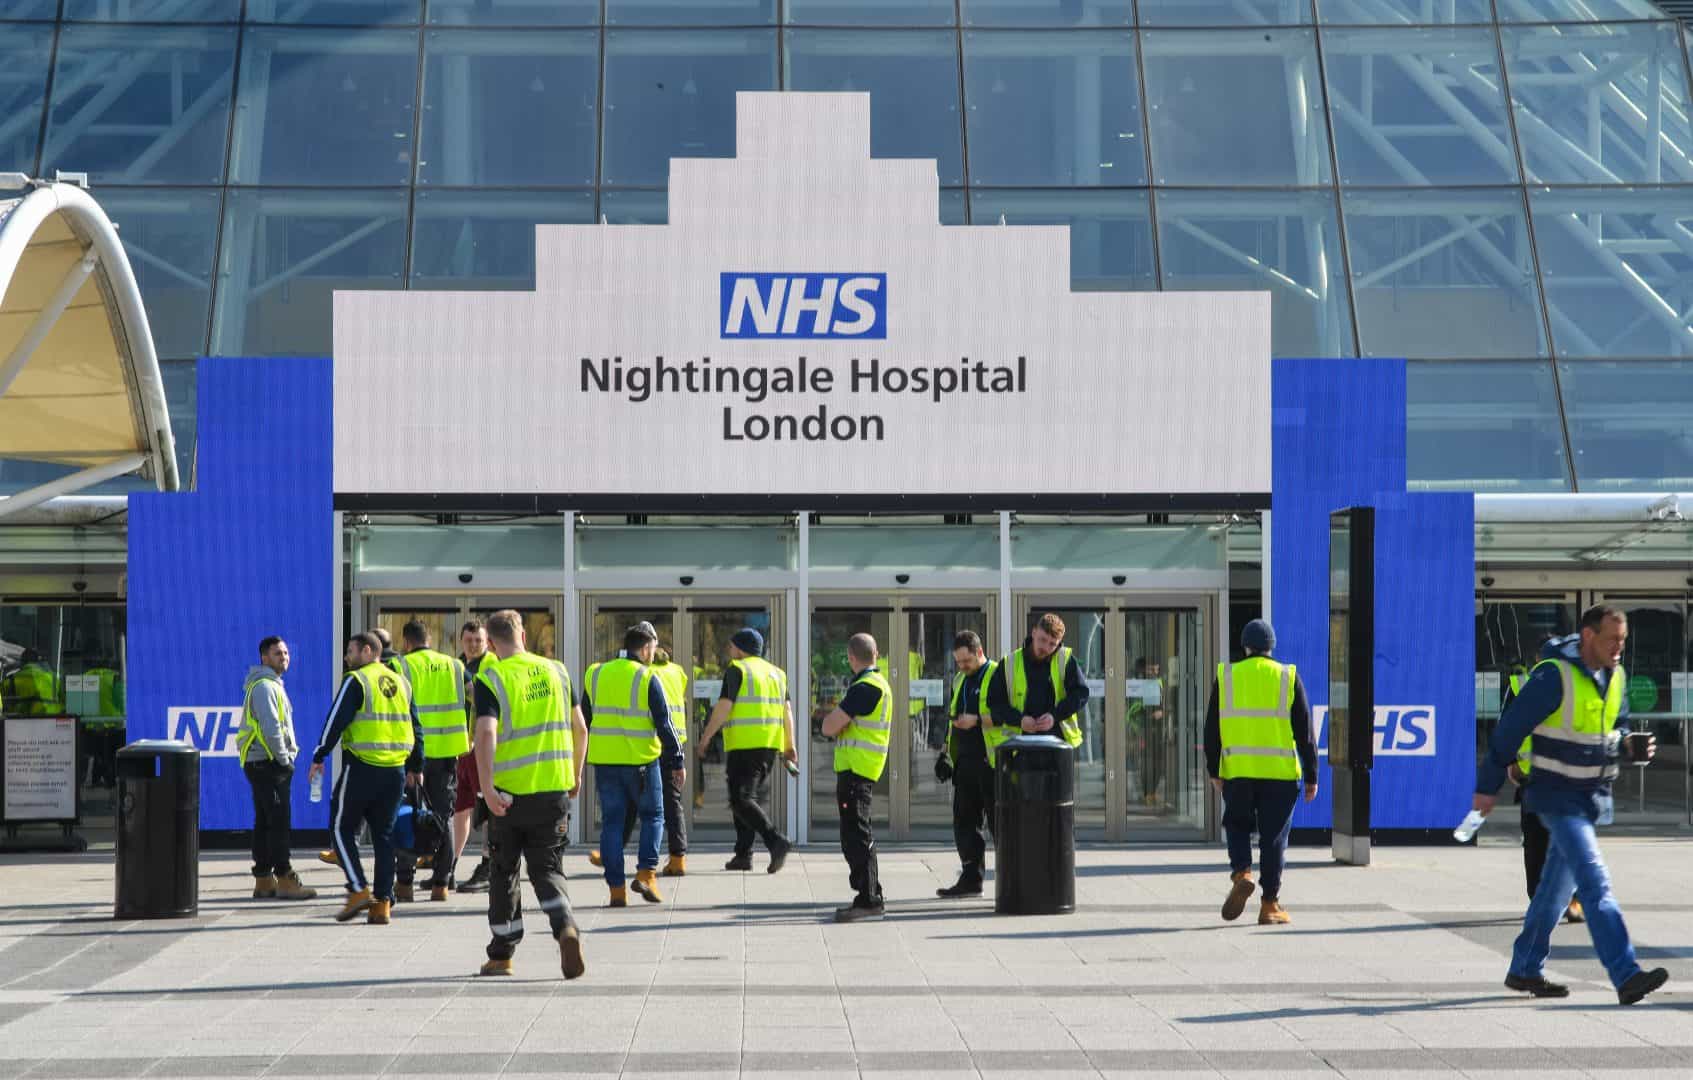 Abu Dhabi owners in U-Turn after charging NHS £2-£3 million a month to use ExCel centre as hospital